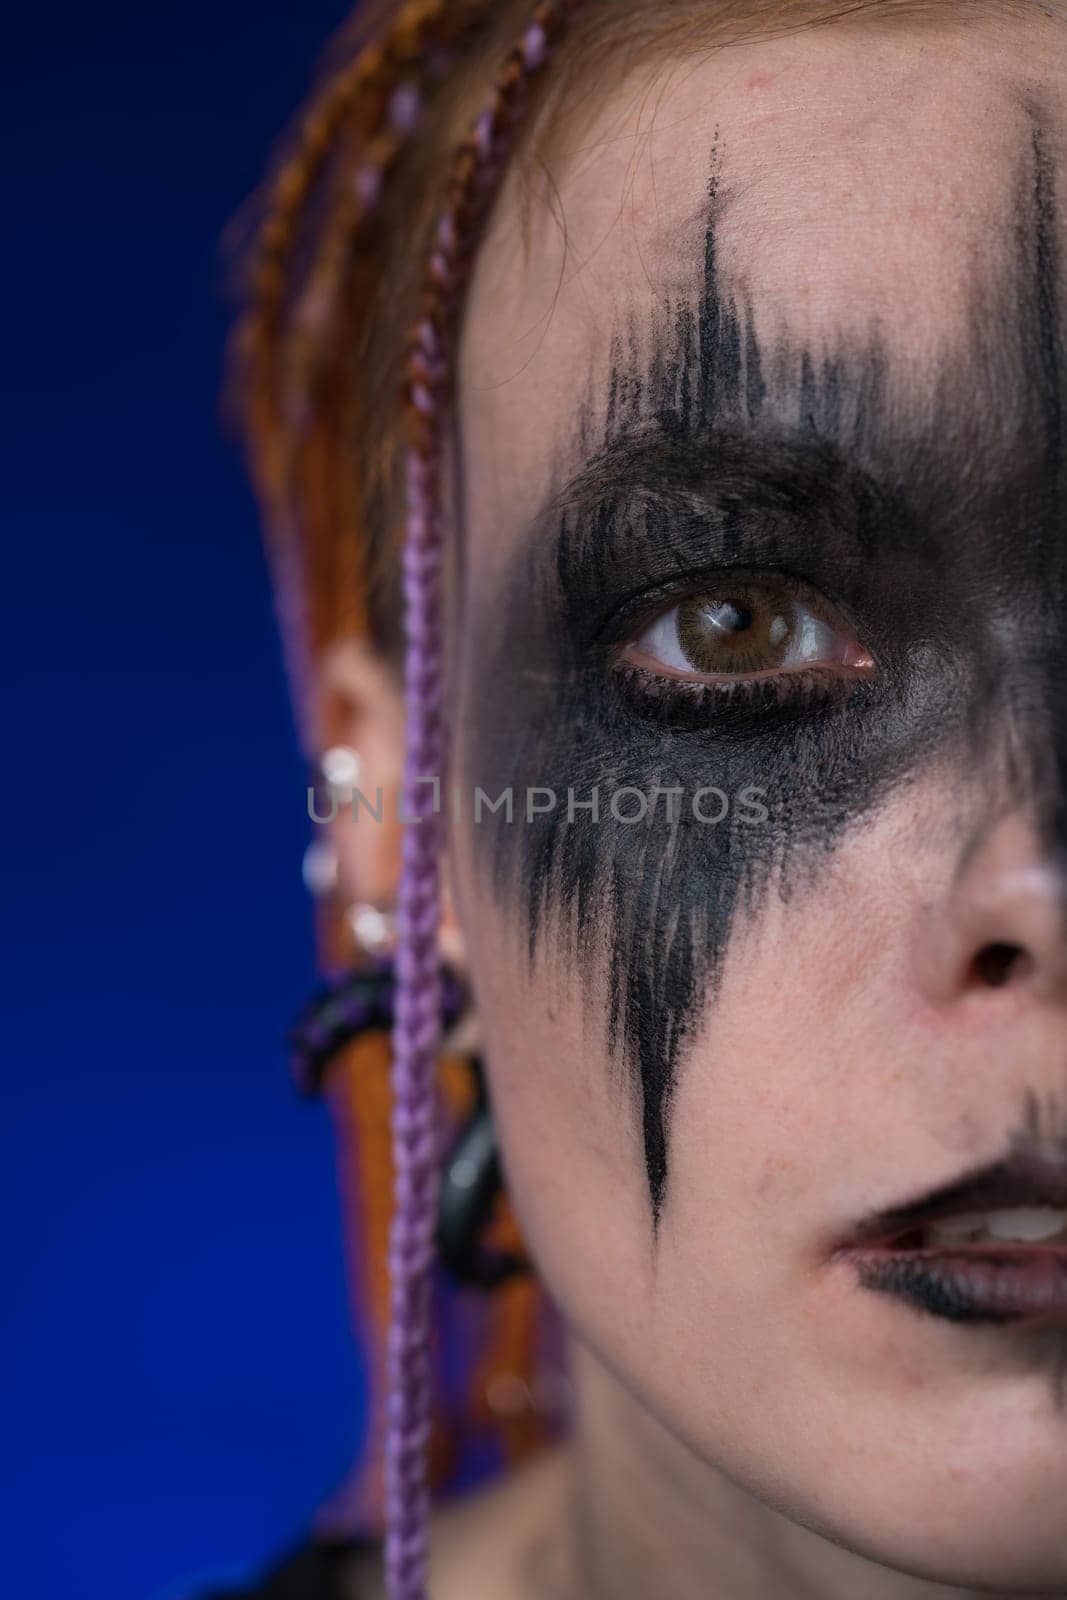 Dramatic portrait of half female face with horror black stage makeup and dreadlocks hairstyle by Alexander-Piragis